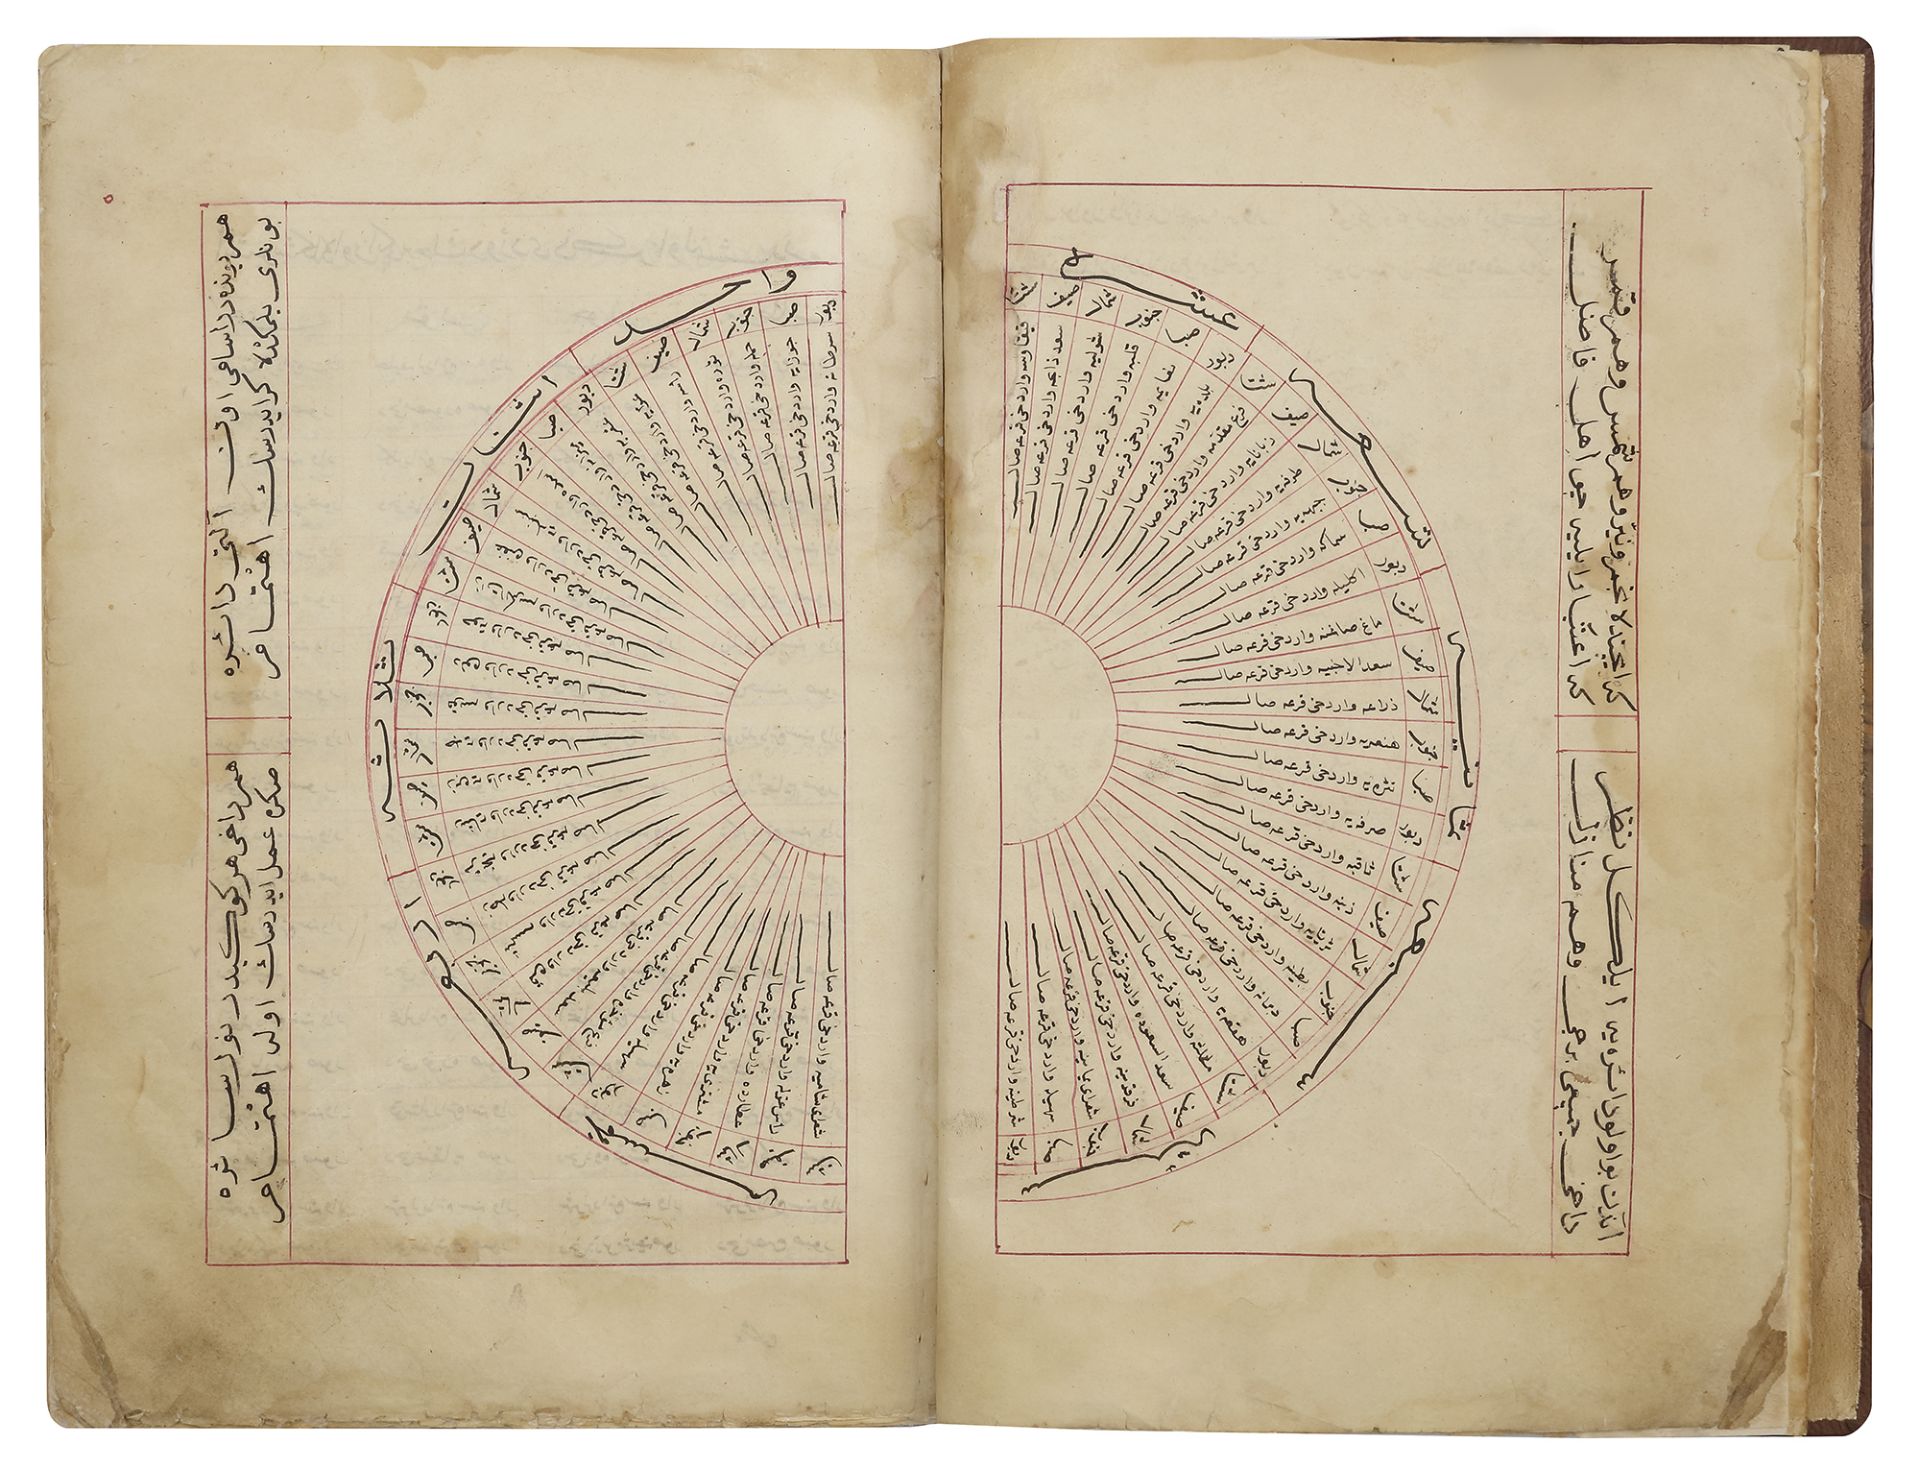 AN OTTOMAN POETRY AND ASTROLOGY BOOK, 18TH CENTURY - Image 2 of 4